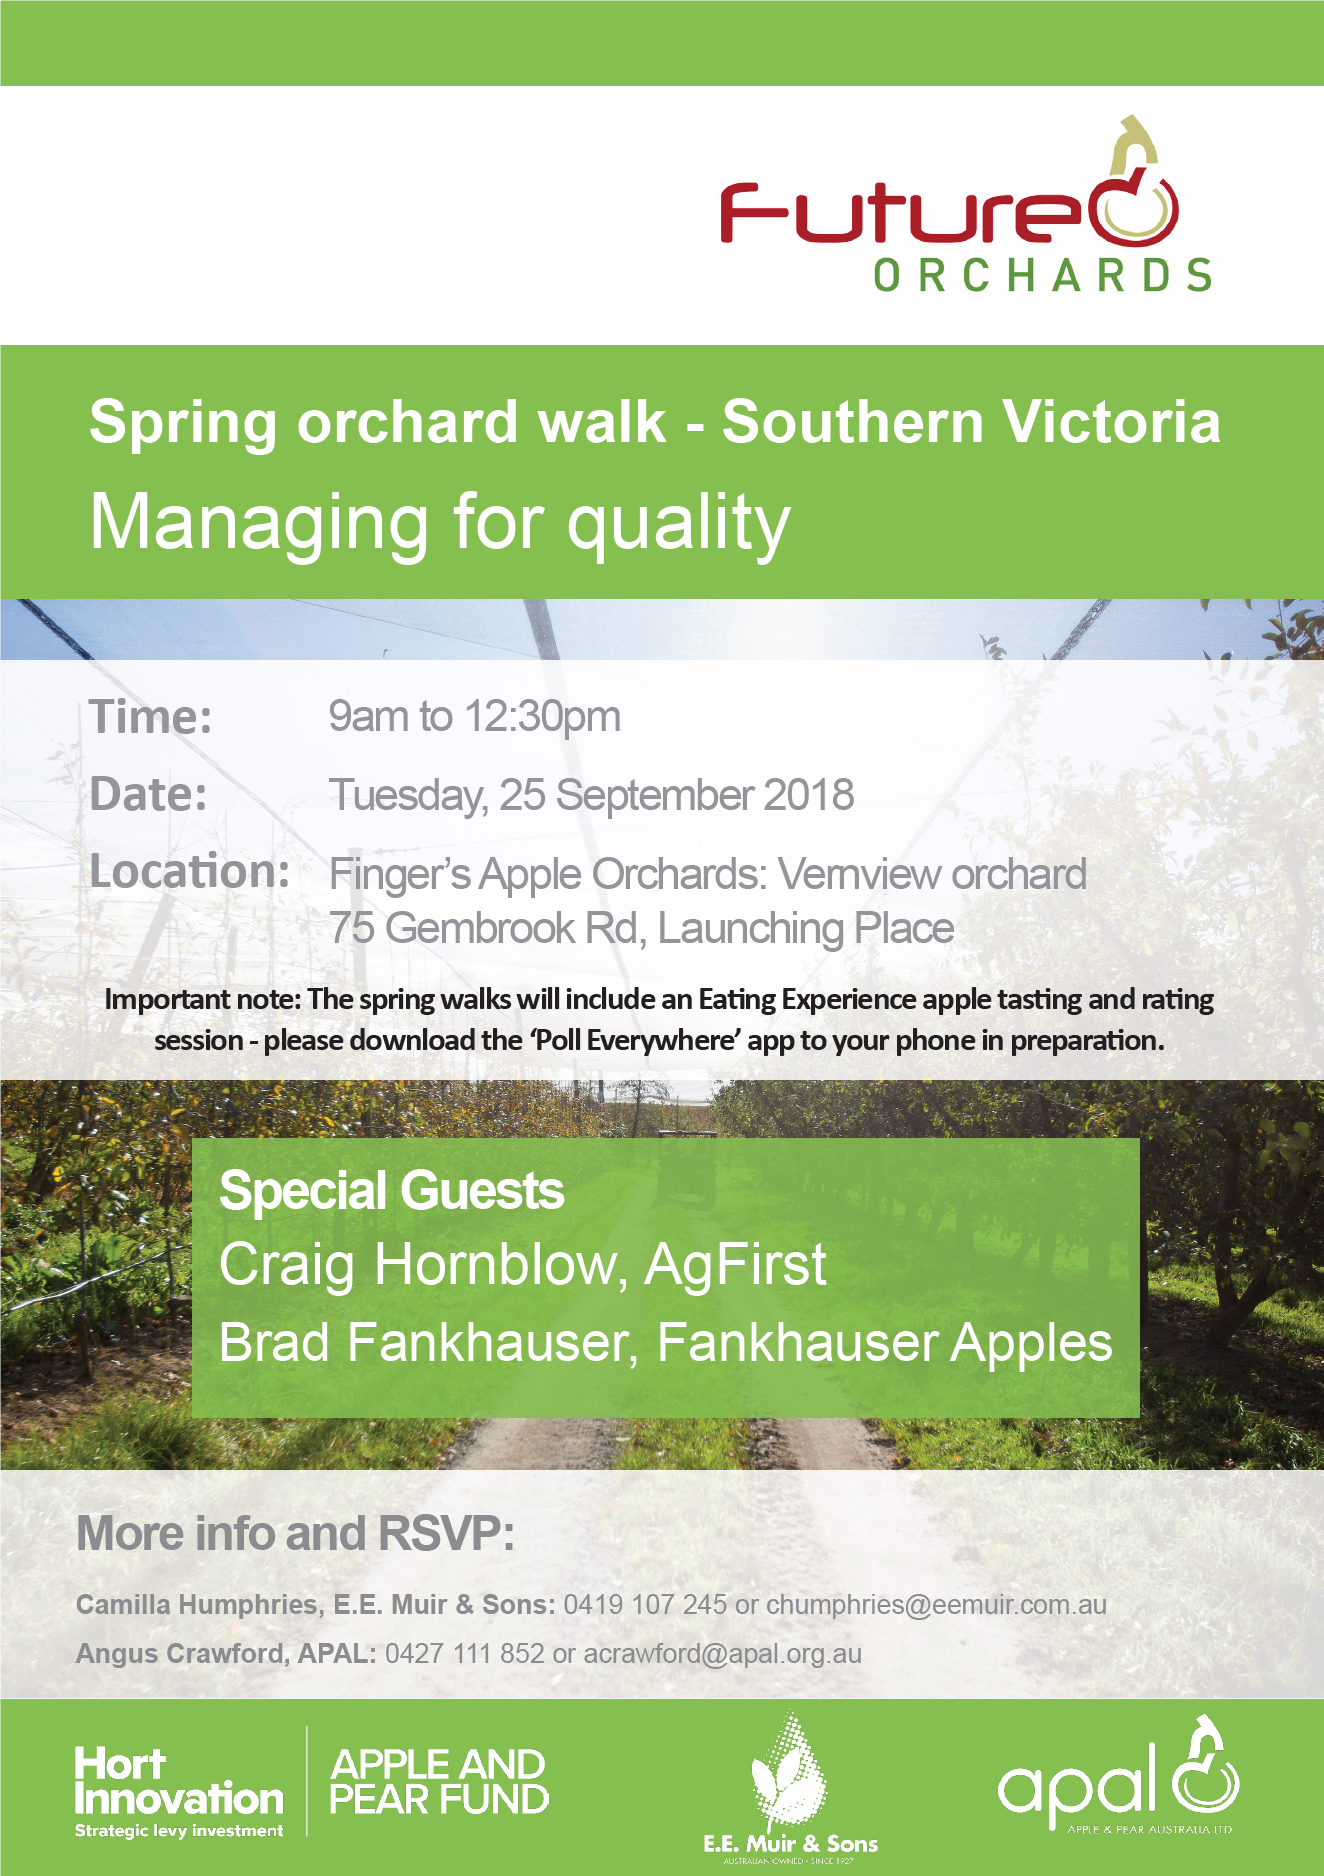 Future Orchards 'Spring Orchard Walk'- Southern Victoria. Tuesday 25th September 2018 from 9:00am-12:30pm to be held at Finger's Apple Orchards: Vernview Orchard, 75 Gembrook Road, Launching Place